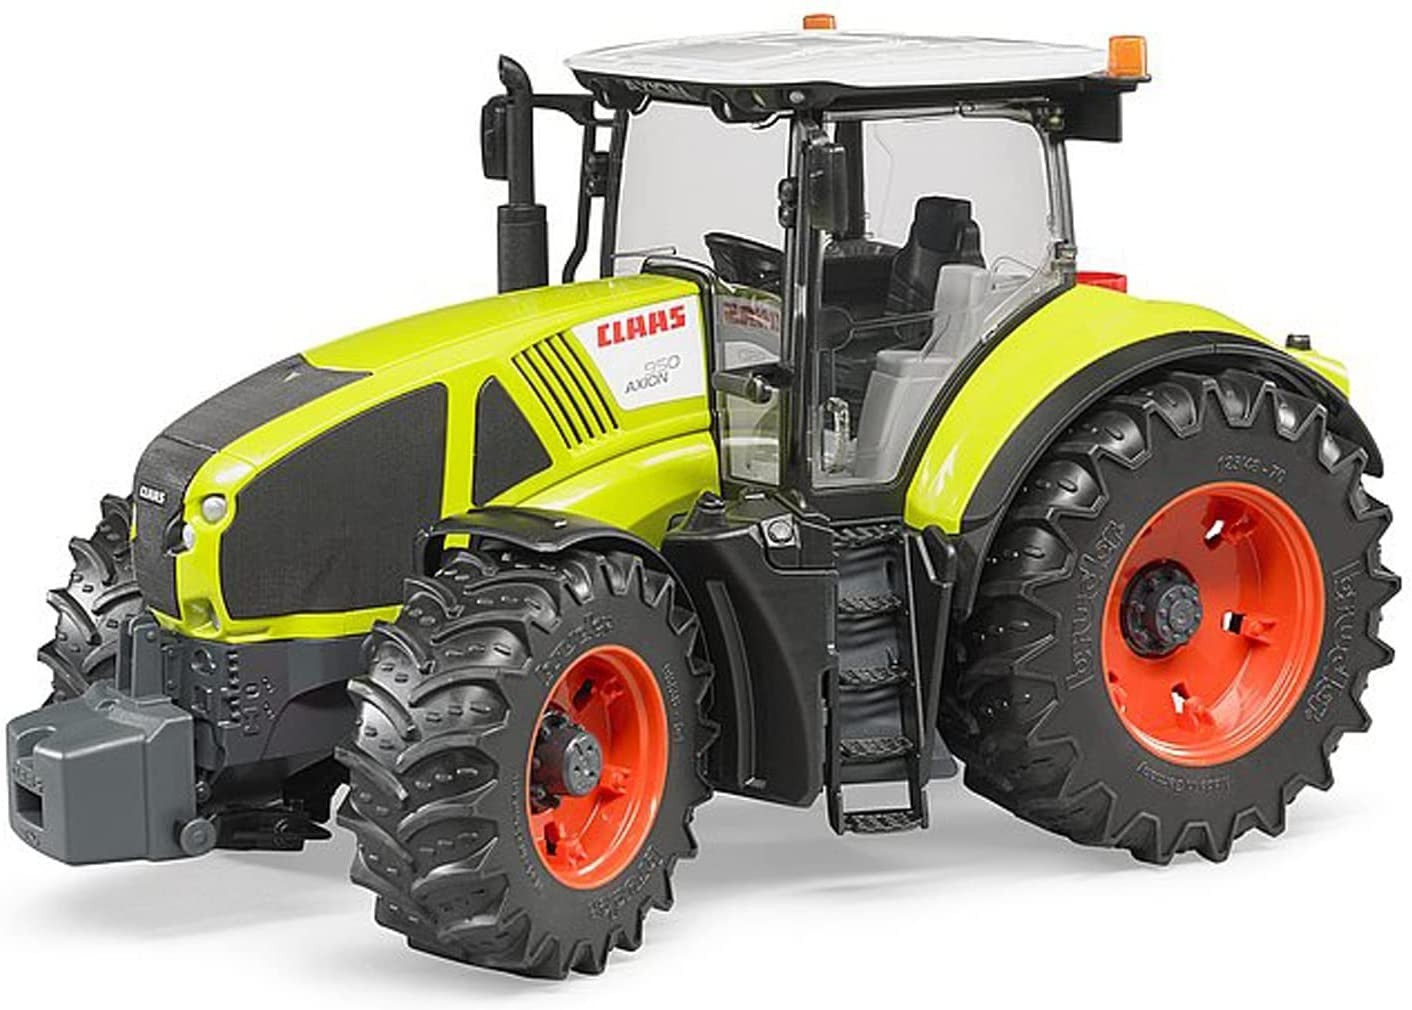 Trattore Bruder  Claas Axion 950 Trattore